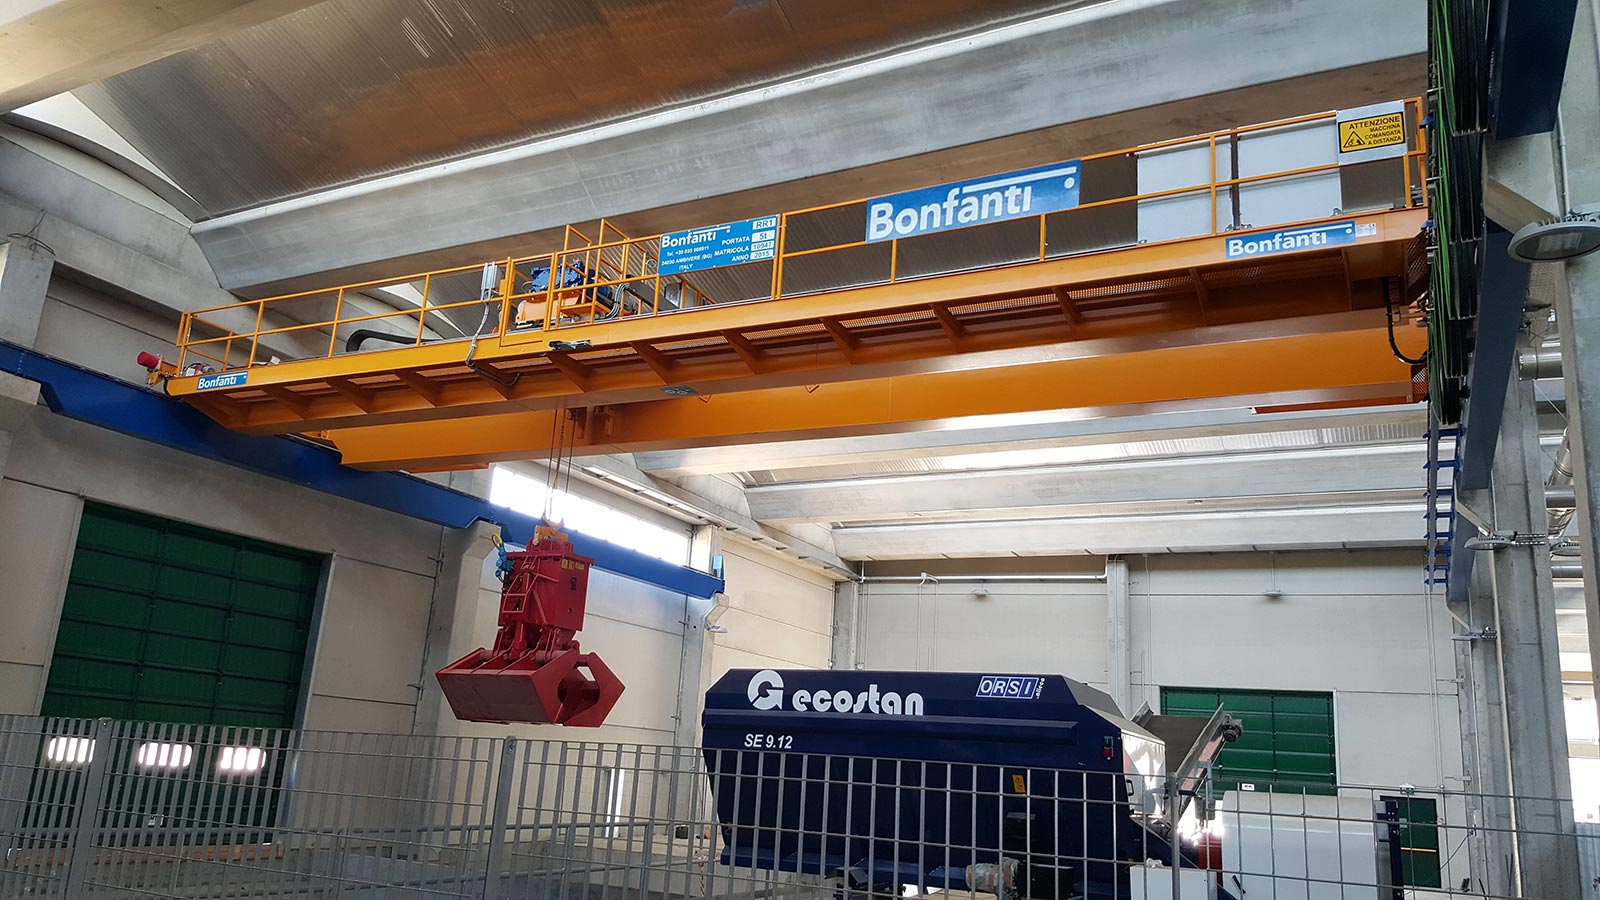 BONFANTI lifting equipment for the ecology and waste treatment sector